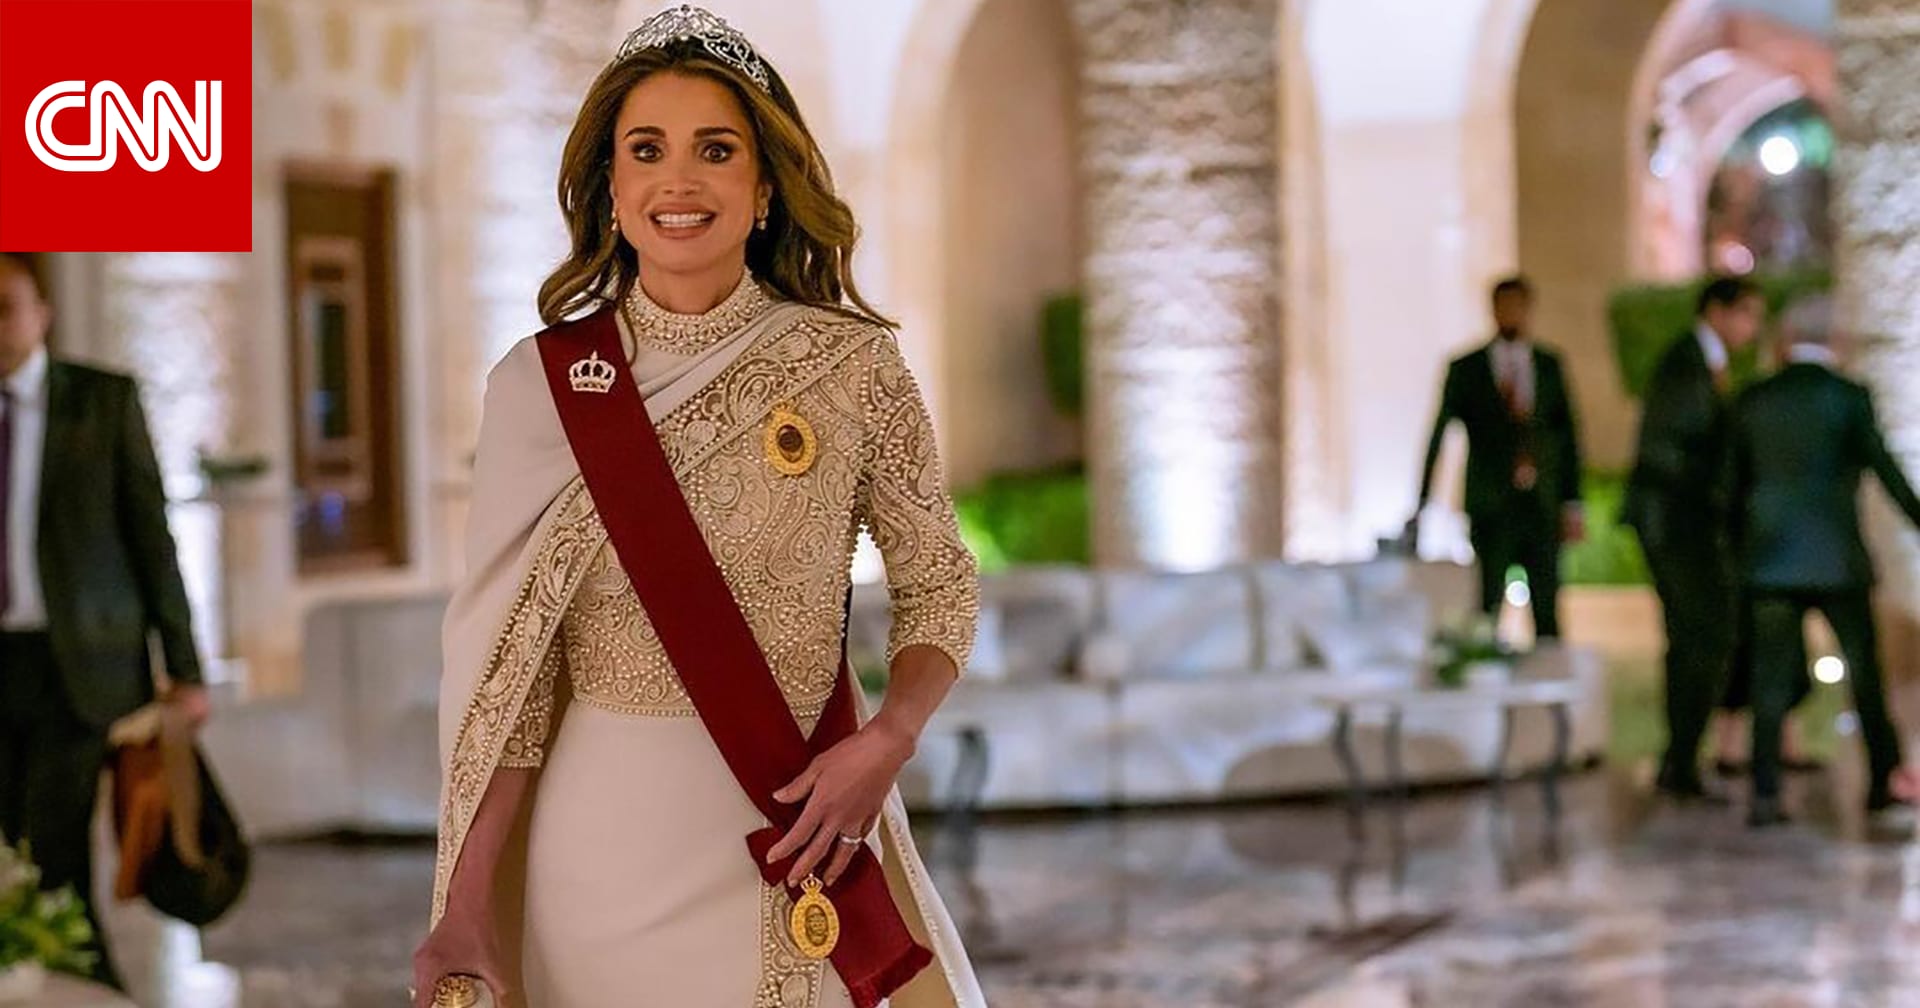 Queen Rania’s second glamorous appearance at the wedding of Jordan’s Crown Prince.. Signed by Elie Saab